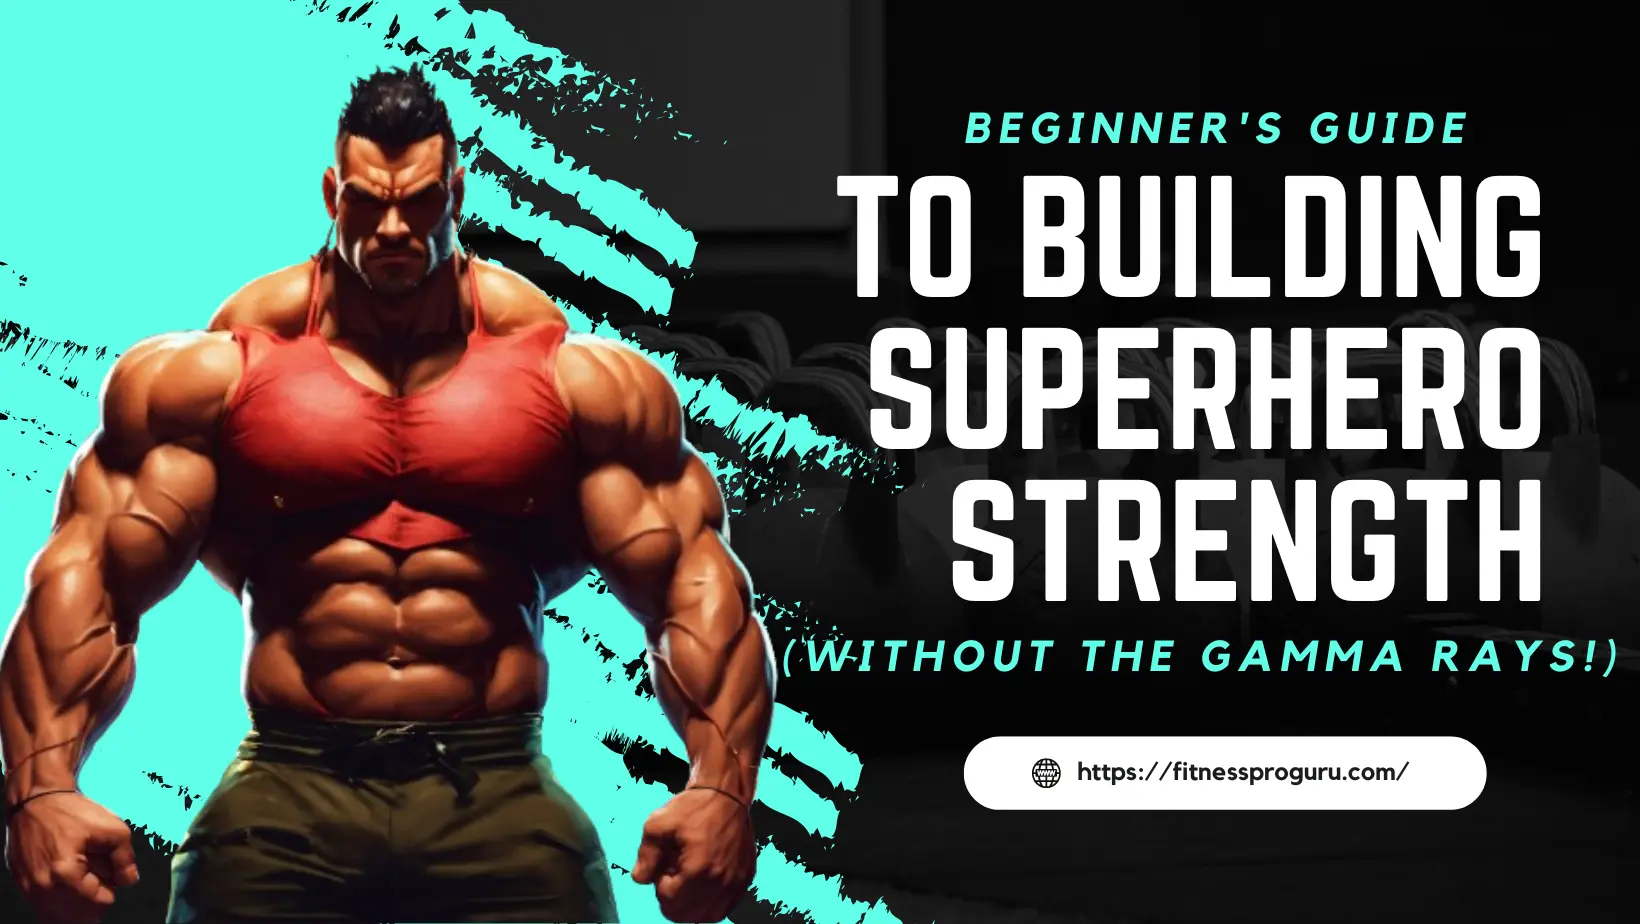 Beginner's Guide to Building Superhero Strength (without the gamma rays!)